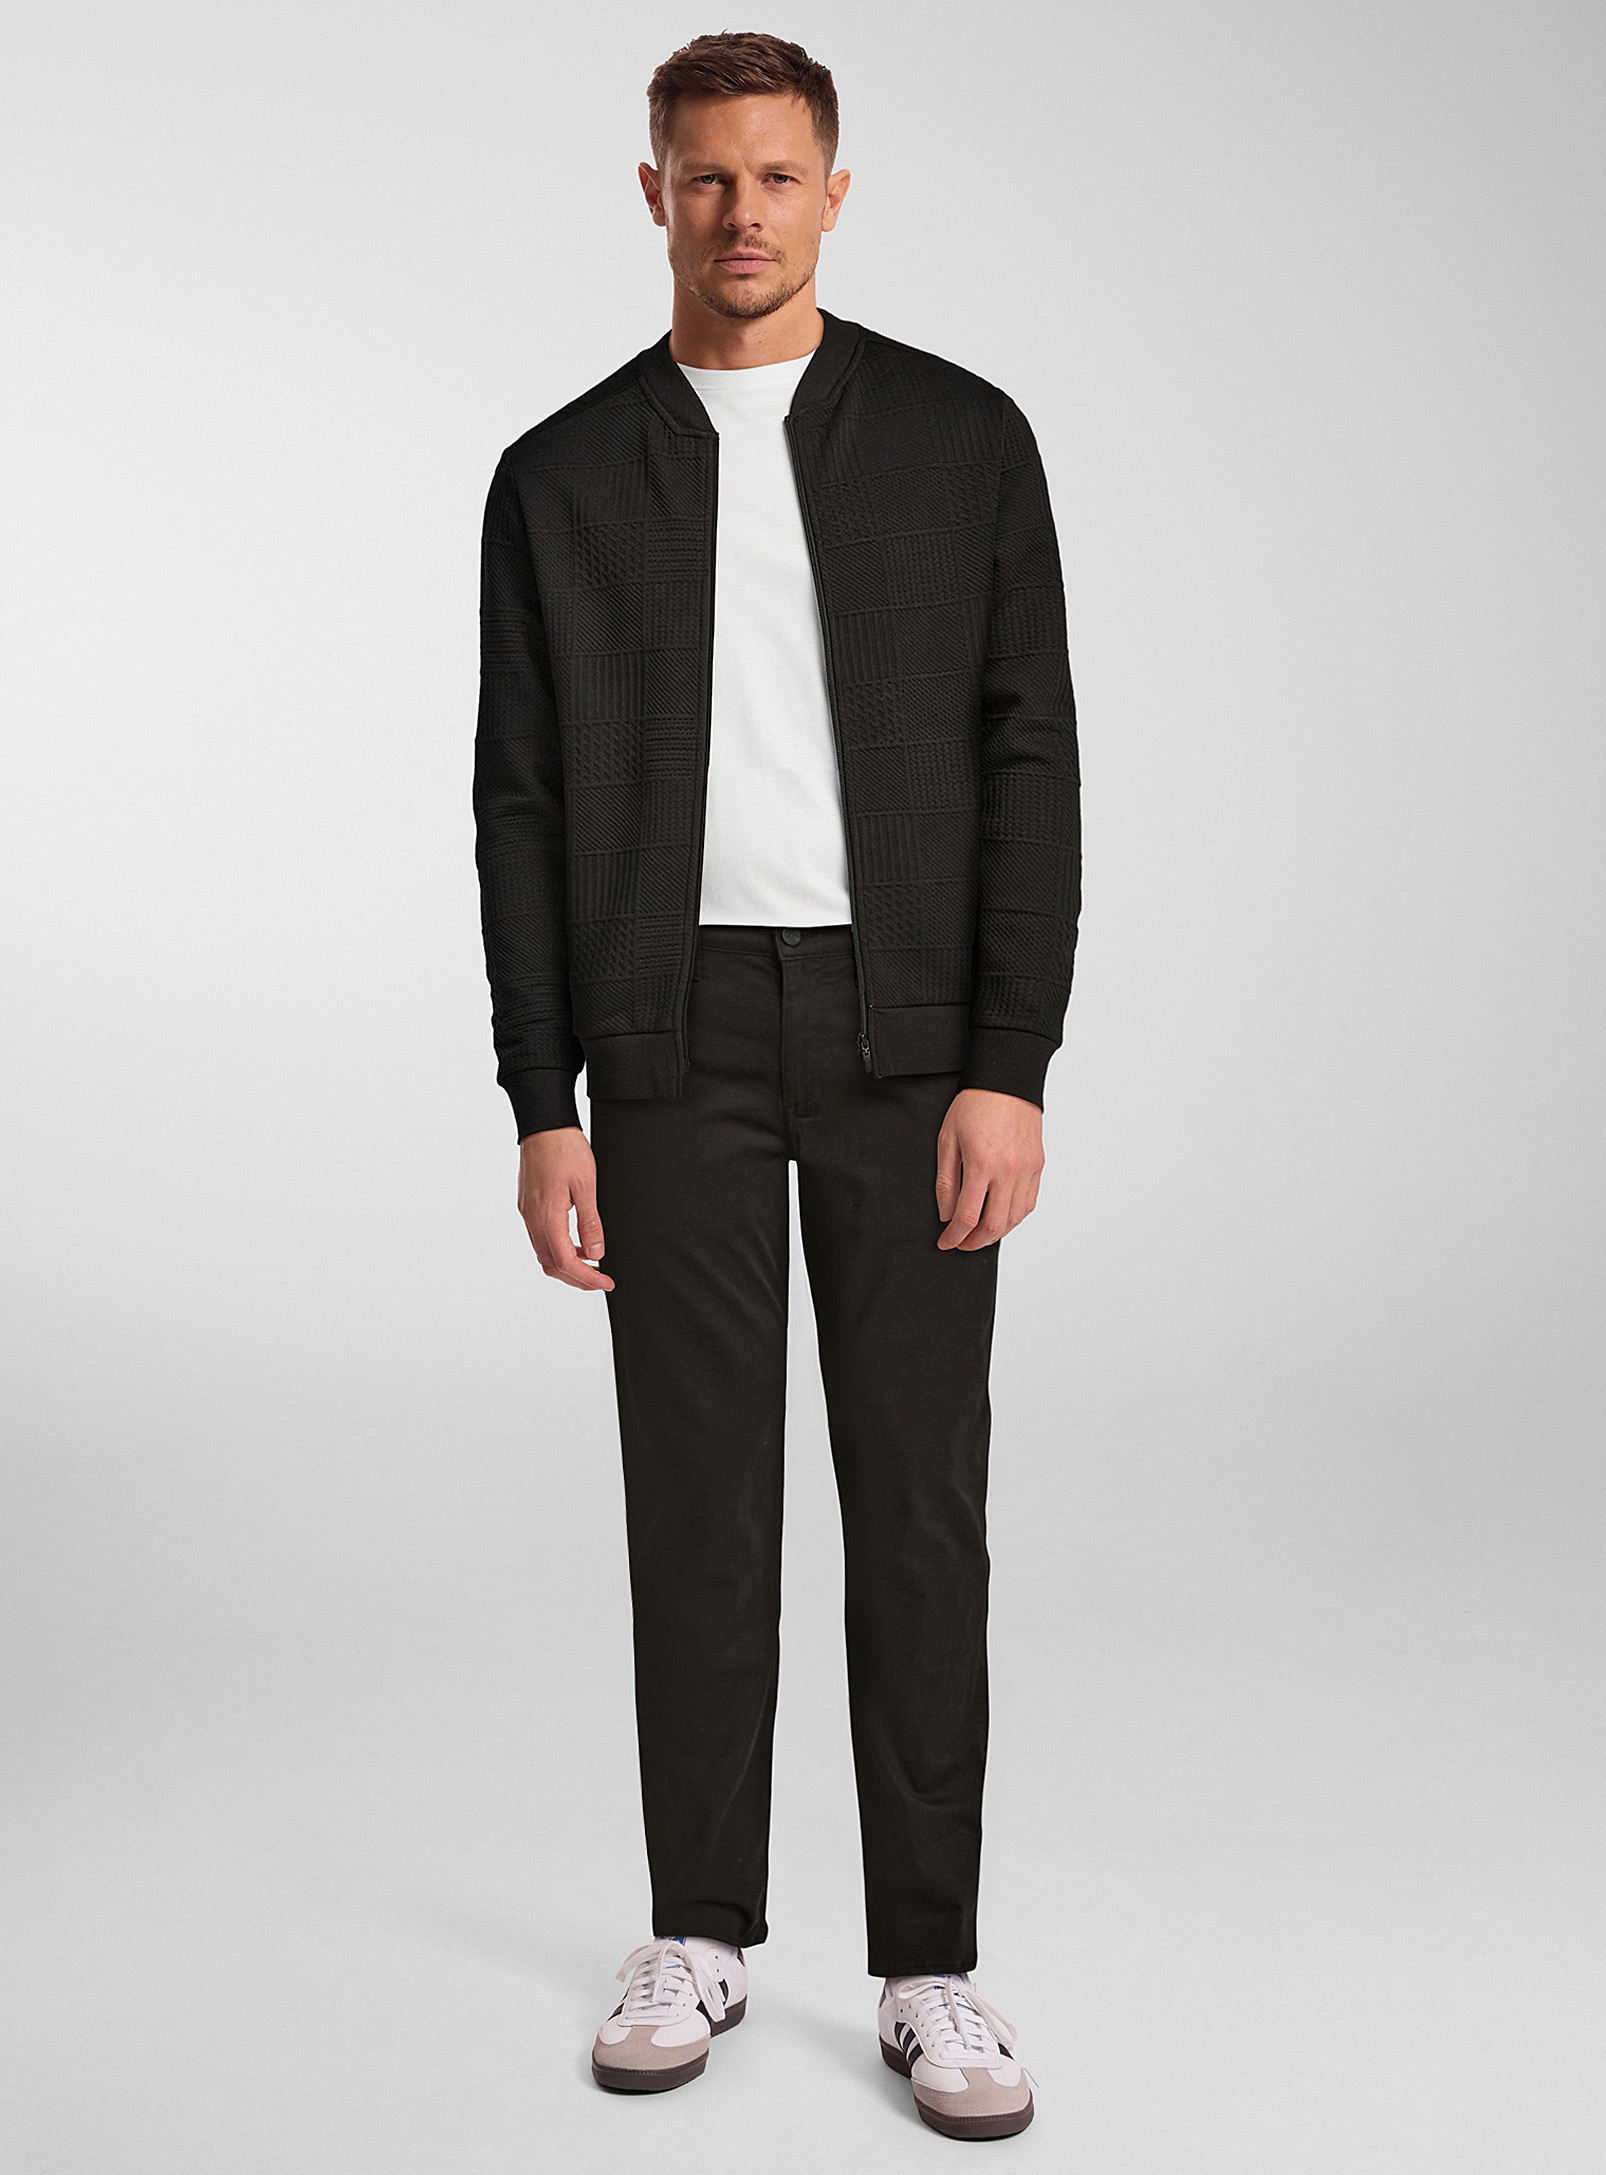 34 Heritage - Courage black twill pant Straight fit